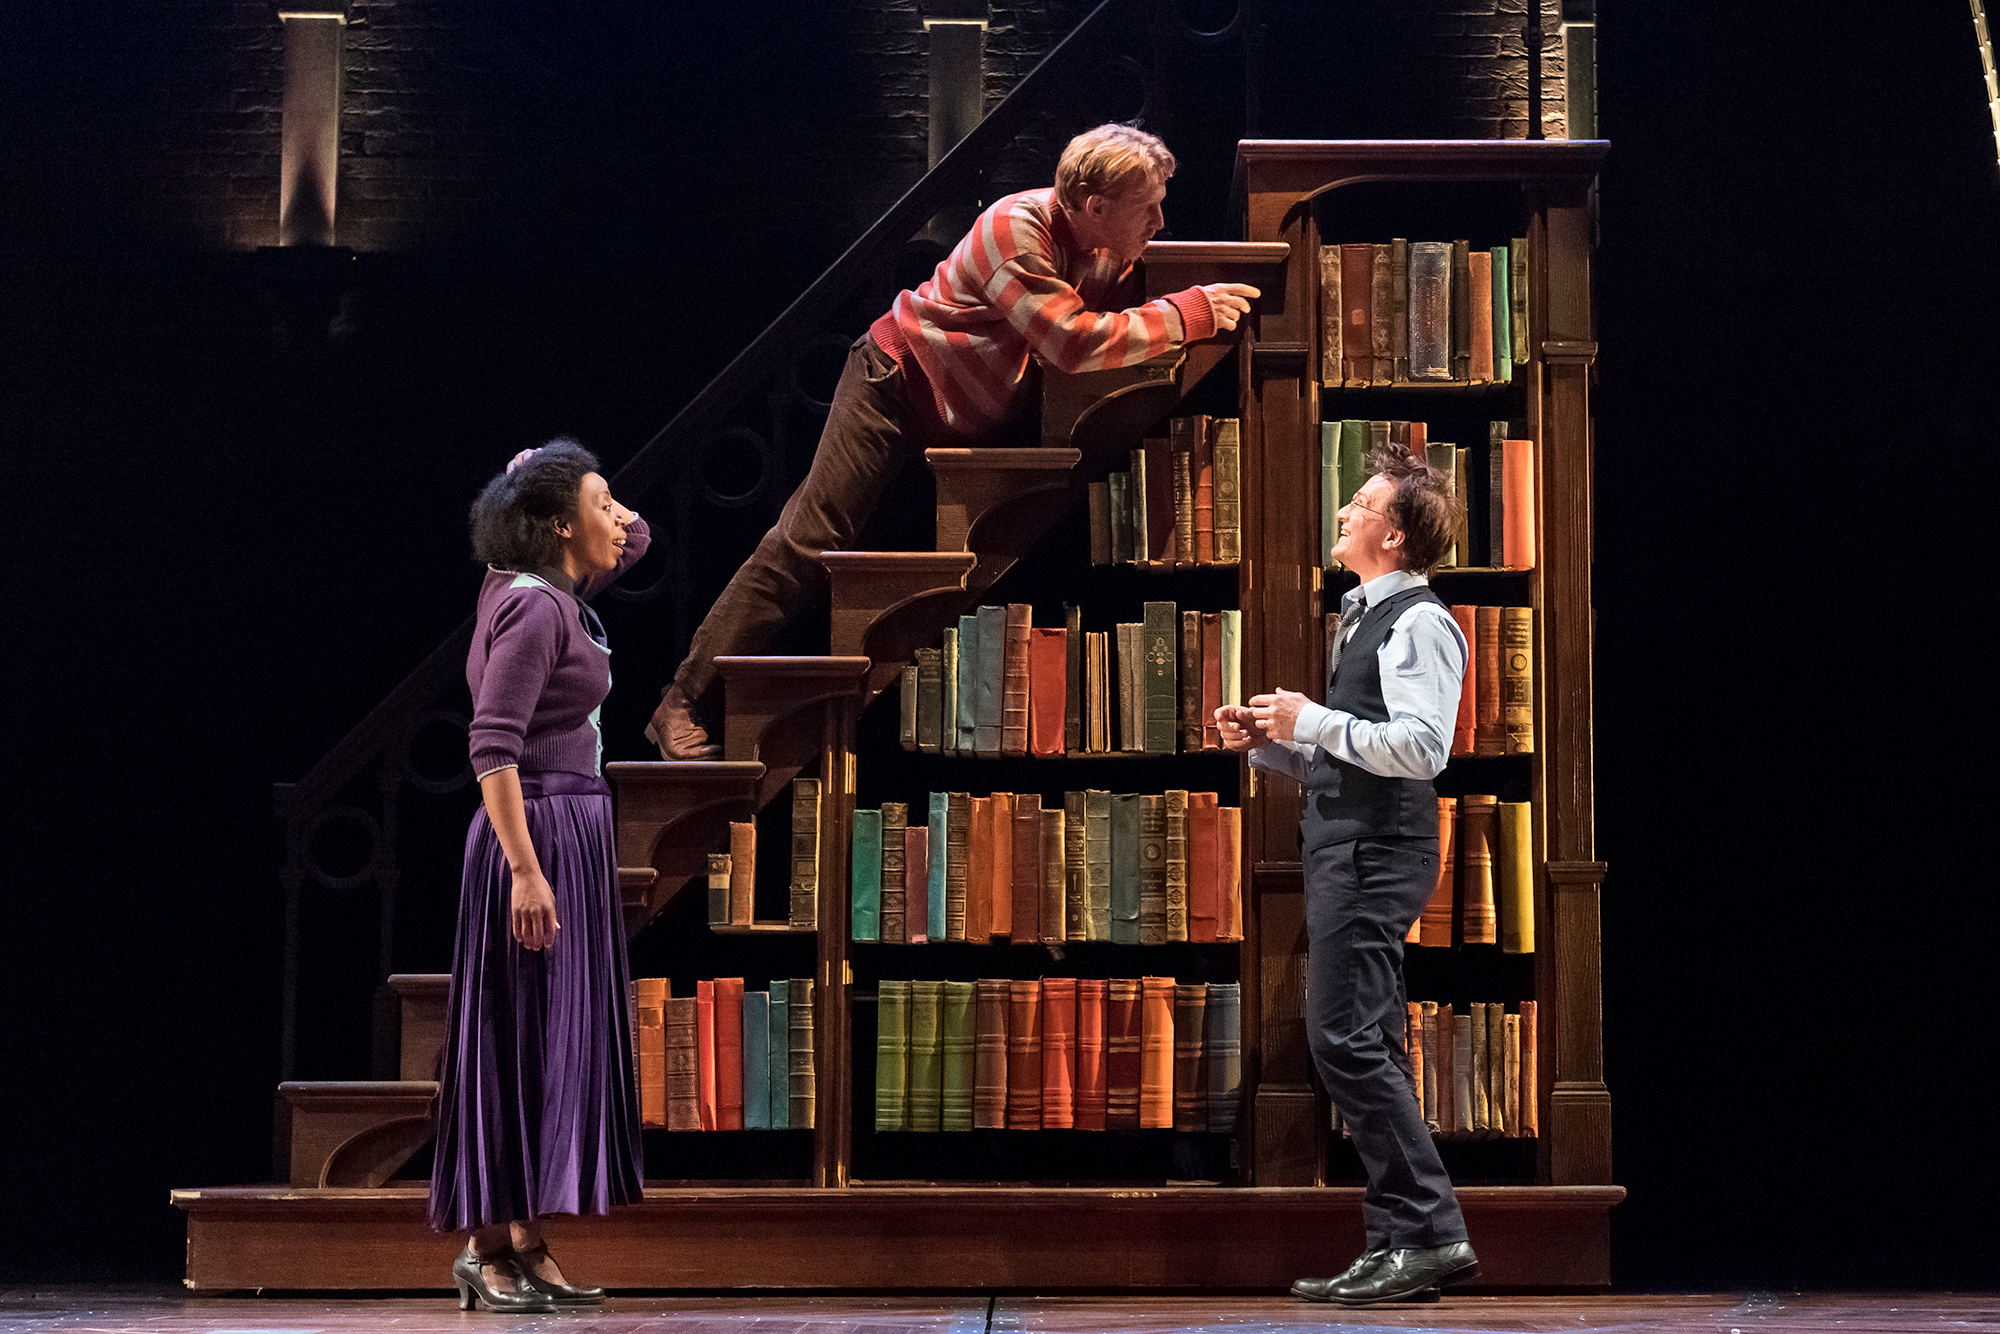 From left: Noma Dumezweni as Hermione Granger, Paul Thornley as Ron Weasley and Jamie Parker as Harry Potter in Harry Potter and the Cursed Child.